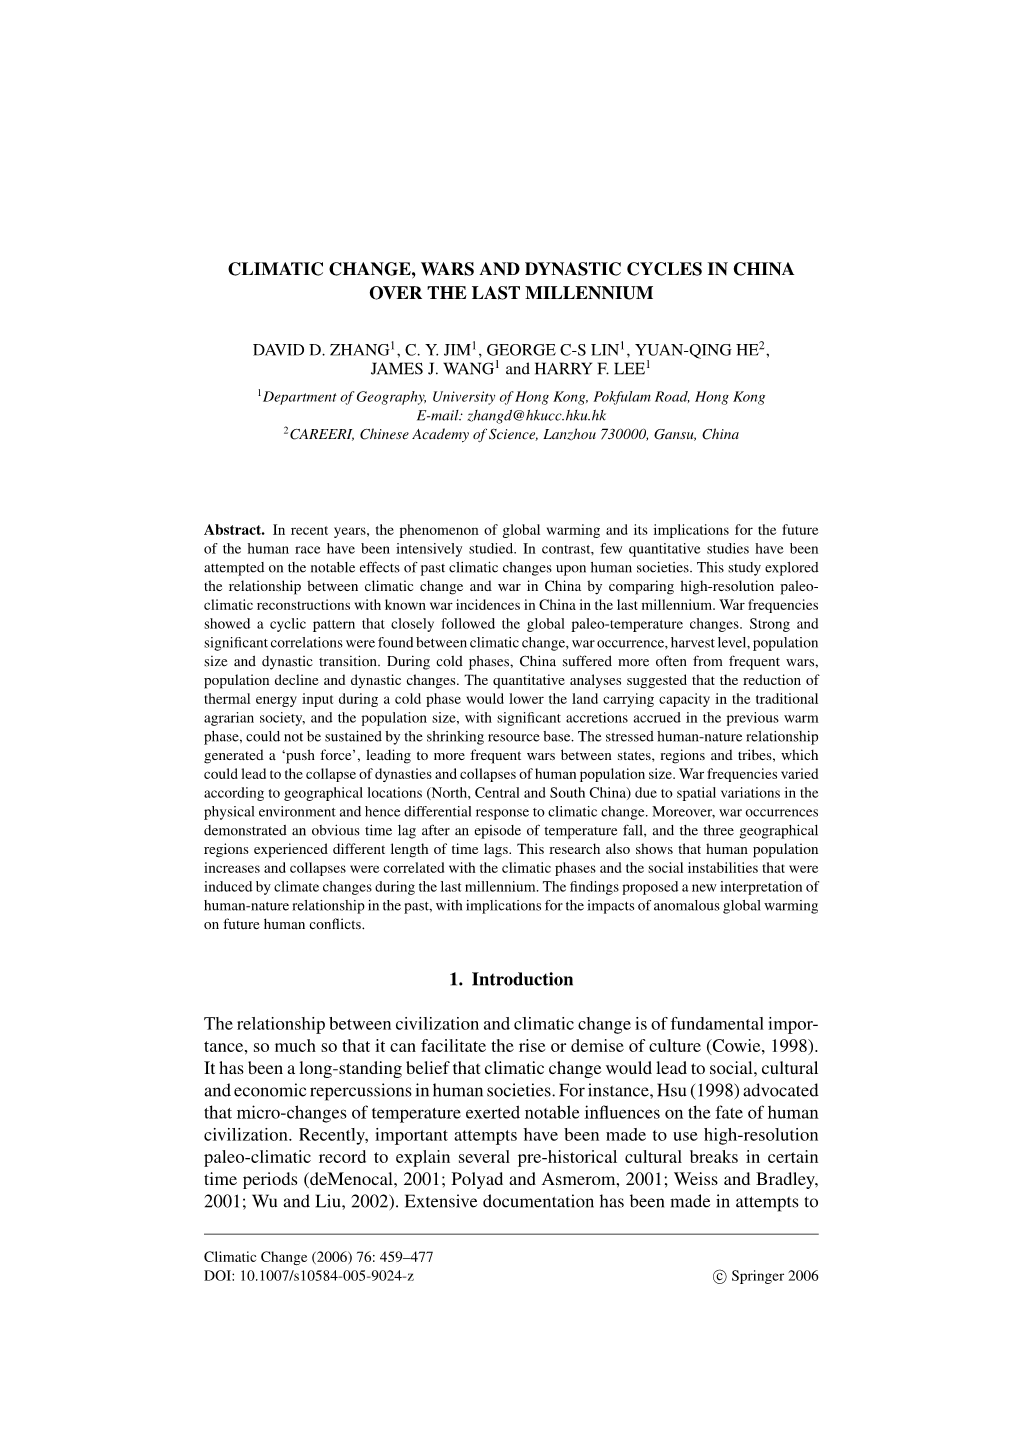 Climatic Change, Wars and Dynastic Cycles in China Over the Last Millennium